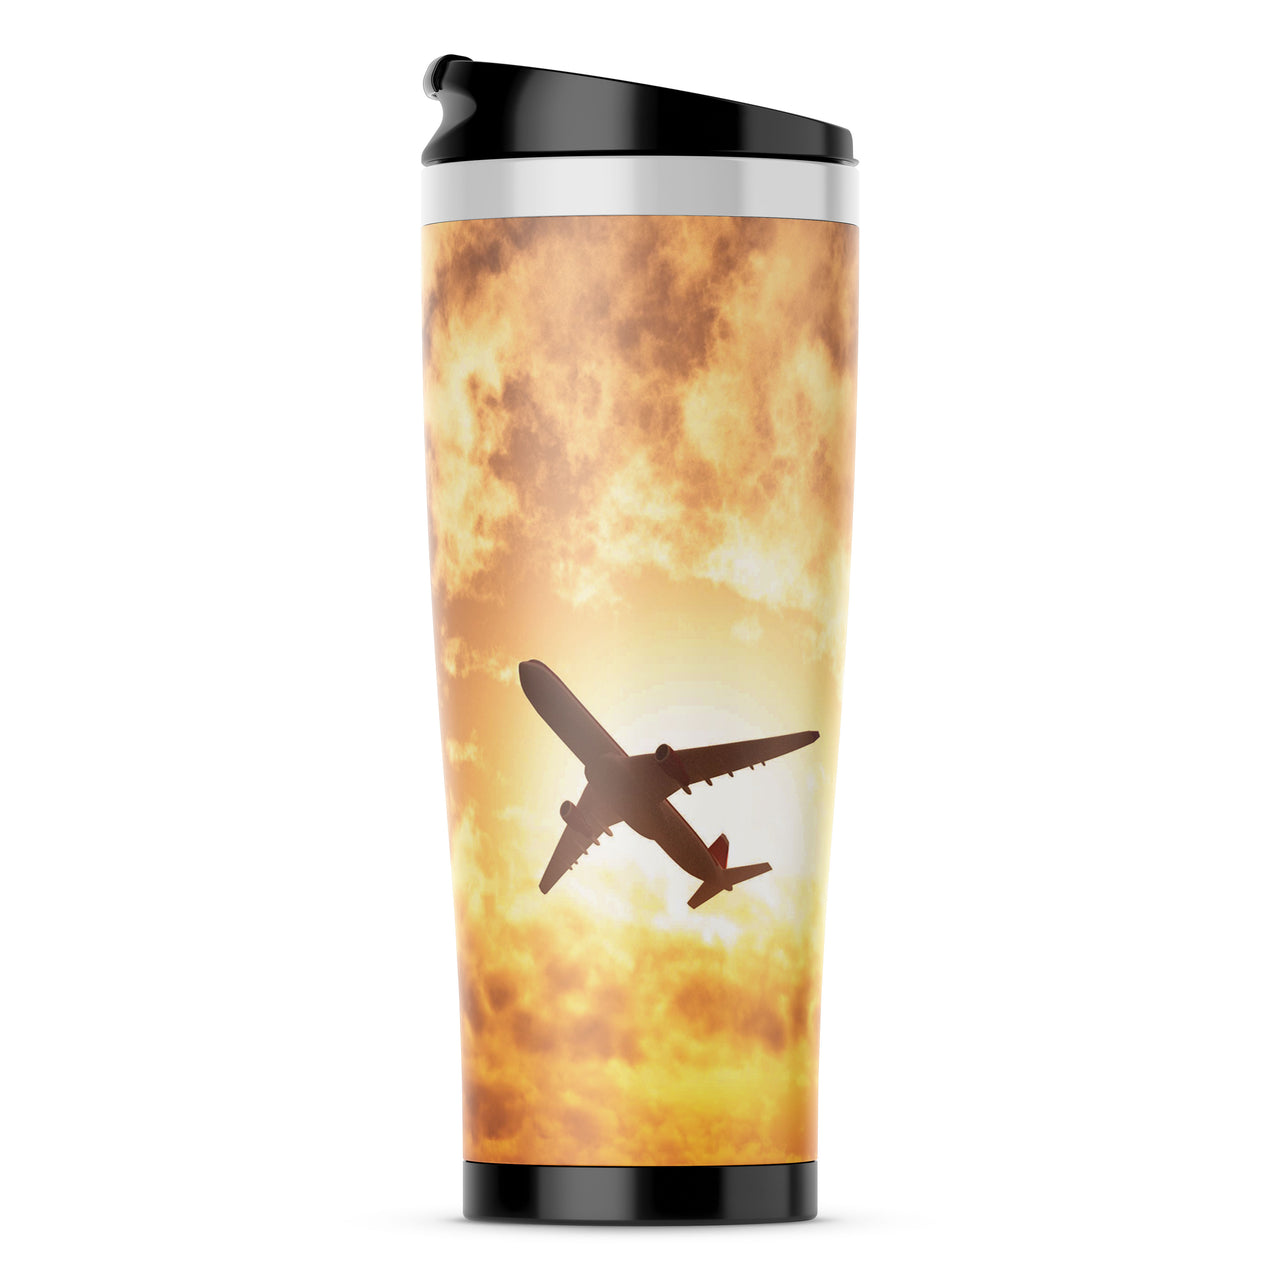 Plane Passing By Designed Stainless Steel Travel Mugs